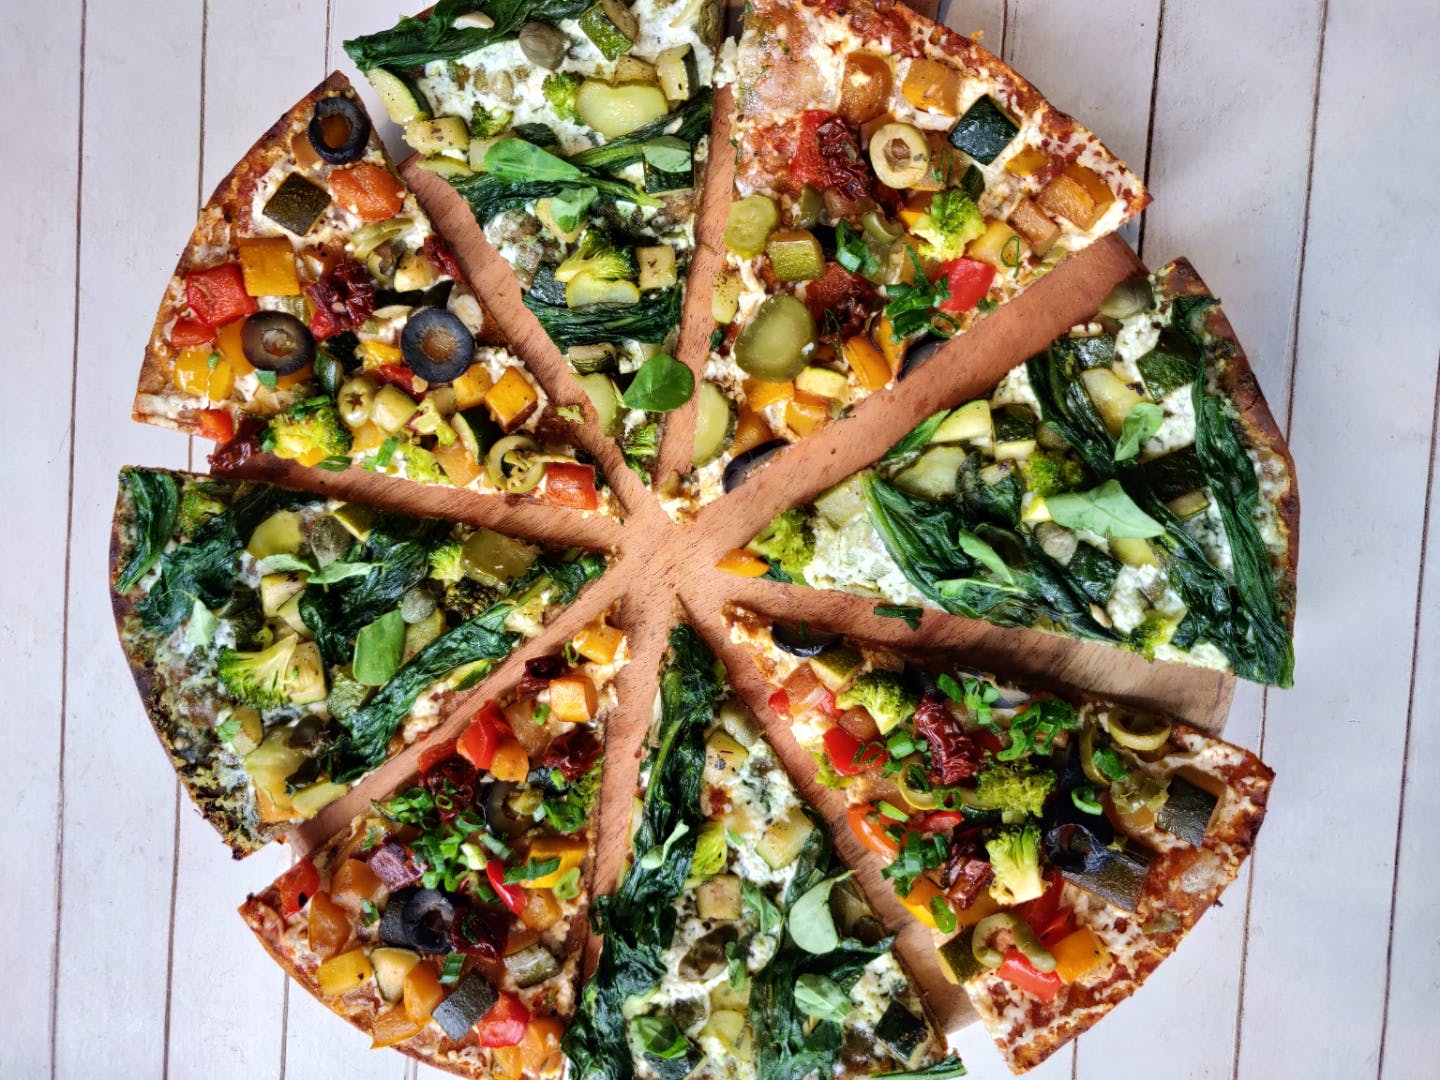 Dish,Cuisine,Pizza,Food,Flatbread,Ingredient,Leaf vegetable,California-style pizza,Pizza cheese,Produce